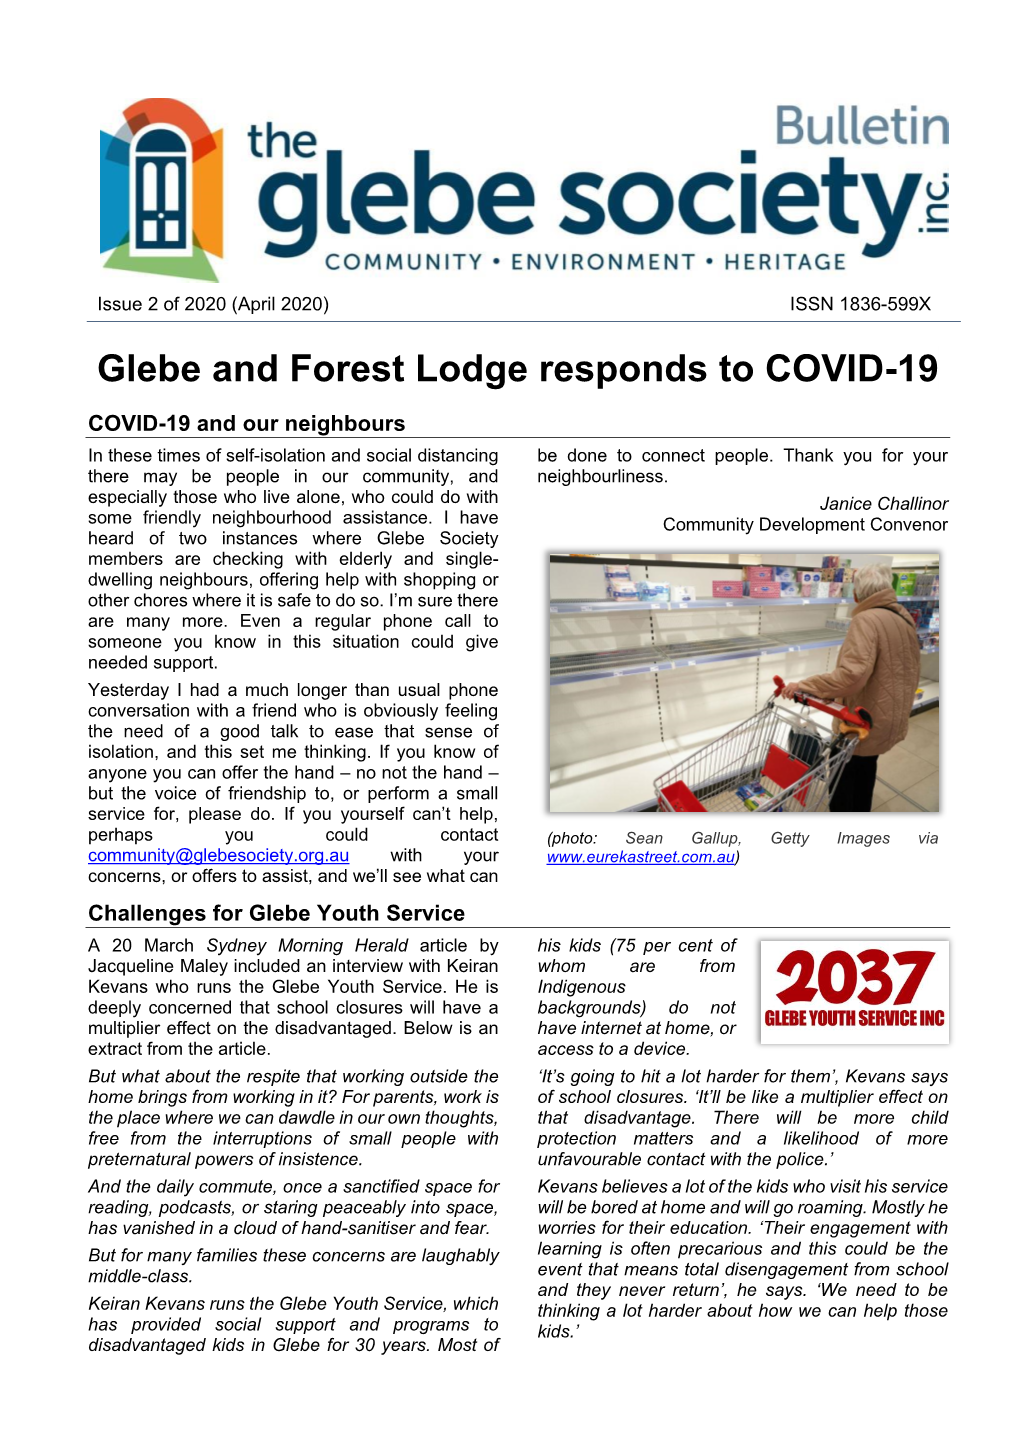 Glebe and Forest Lodge Responds to COVID-19